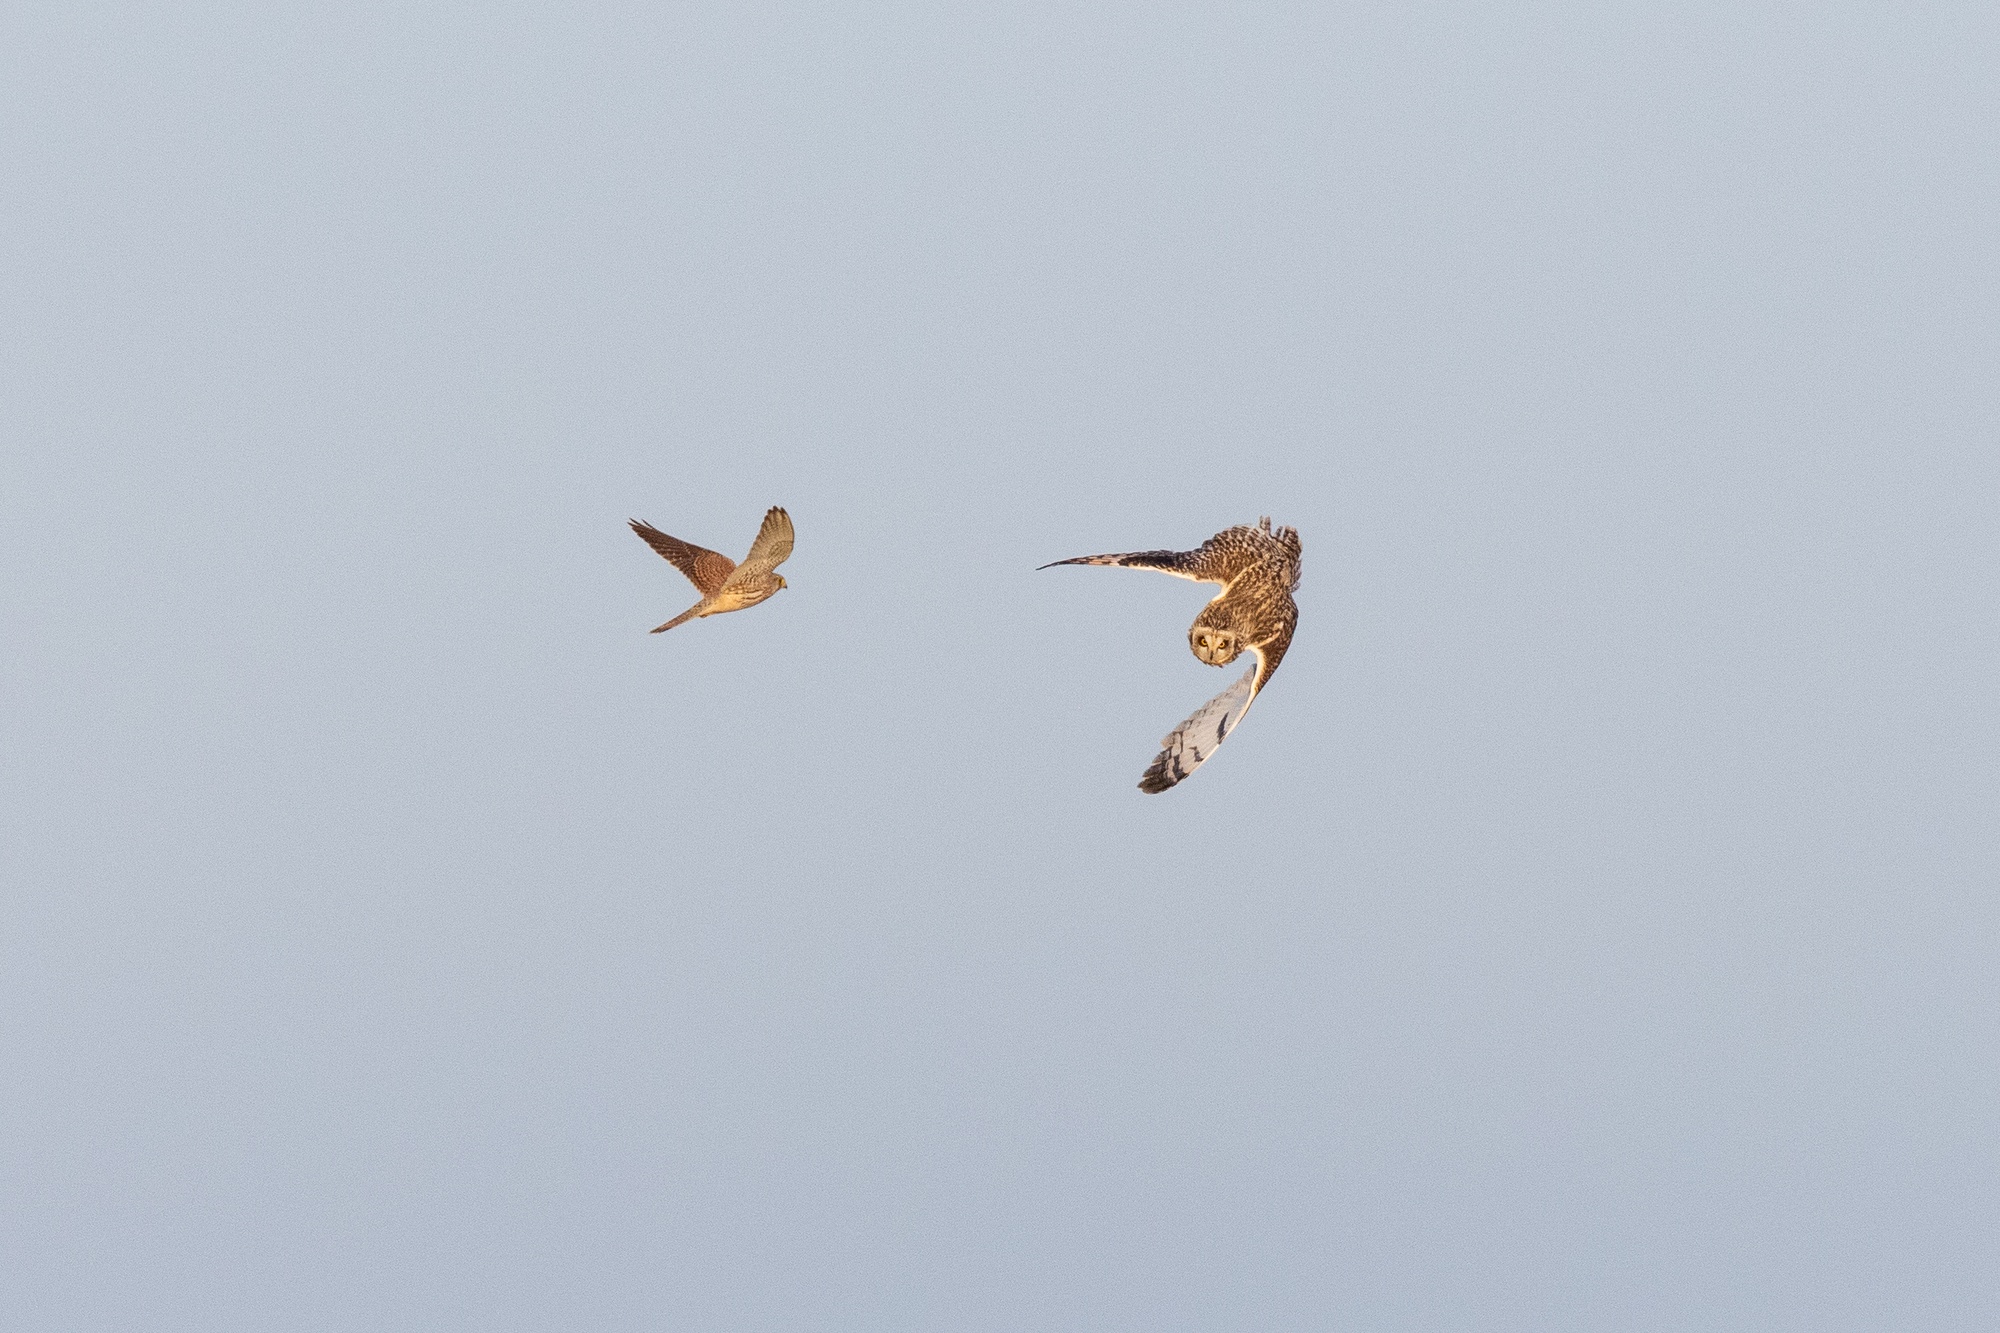 There is a kestrel to left of the center of the frame. It is flying away from the camera towards the owl to it's right. It's wings are up showing both the tops and bottoms of the wing. The owl to it's right is mid-rotation. It's head is towards the camera with it's underside towards the kesrel. It's wings are towards the bottom of their swing. The owl is facing downwards away from the kestrel. The birds appear less than 2 feet apart. The background is a blueish sky.